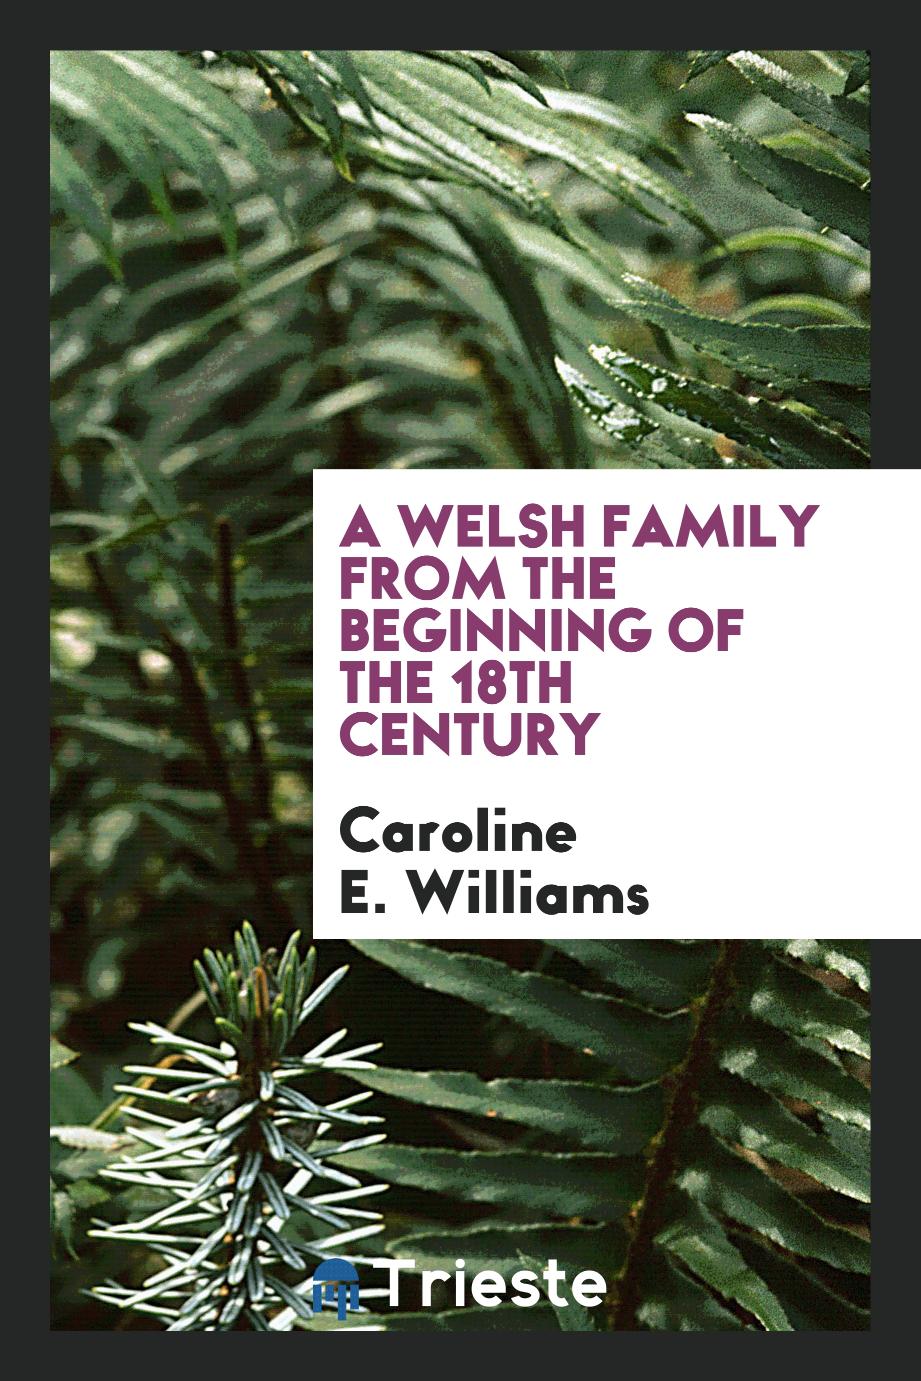 A Welsh family from the beginning of the 18th century